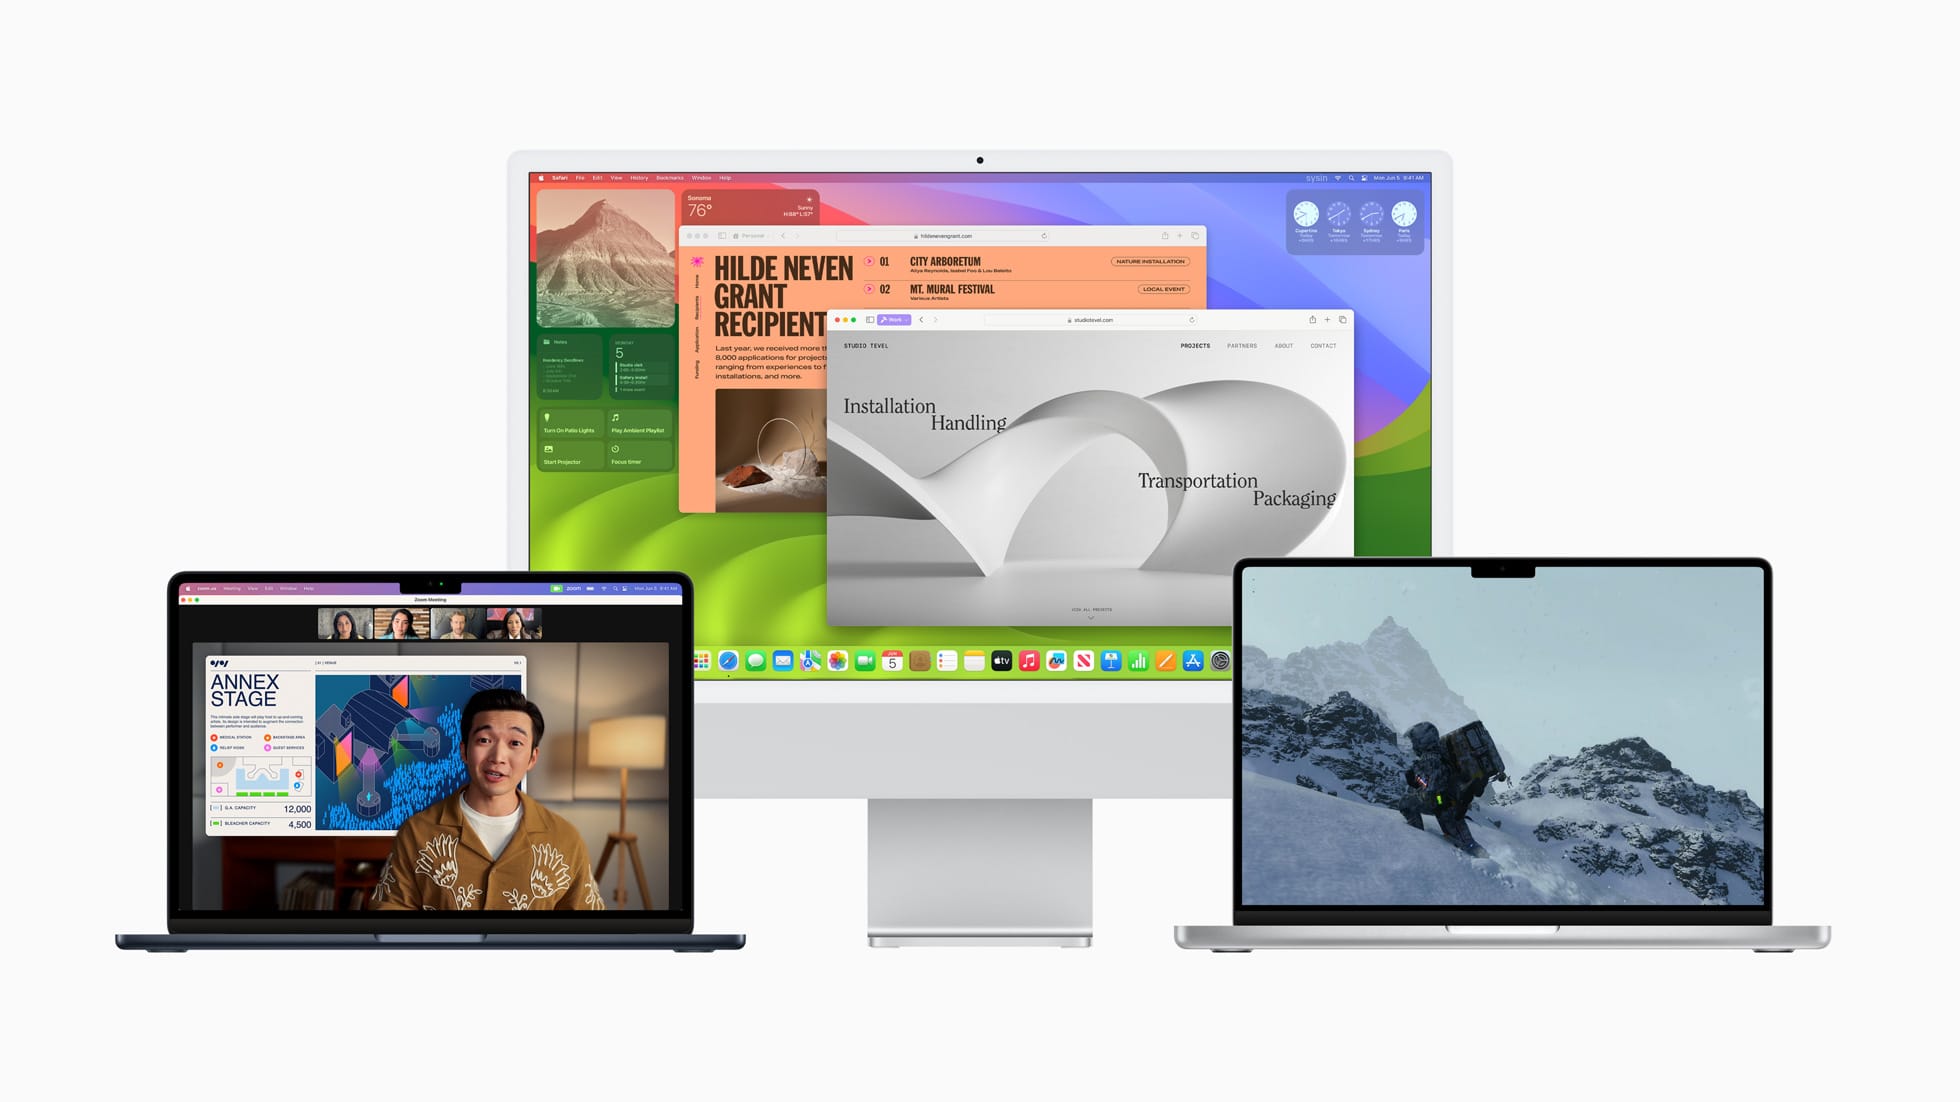 macOS Sonoma on MacBook Air, 27-inch iMac, and MacBook Pro.